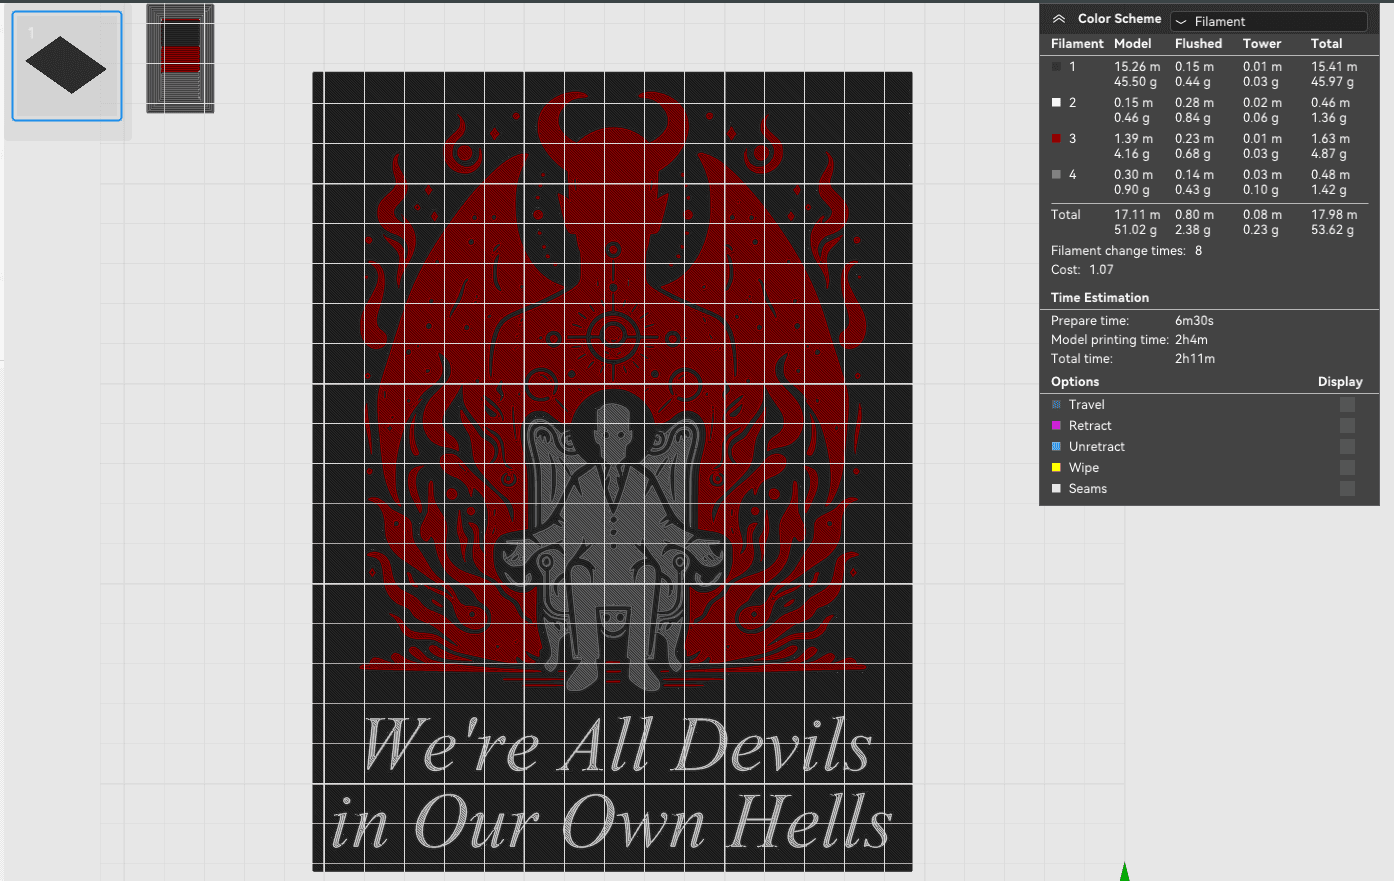 We're All Devils in Our Own Hells 3d model